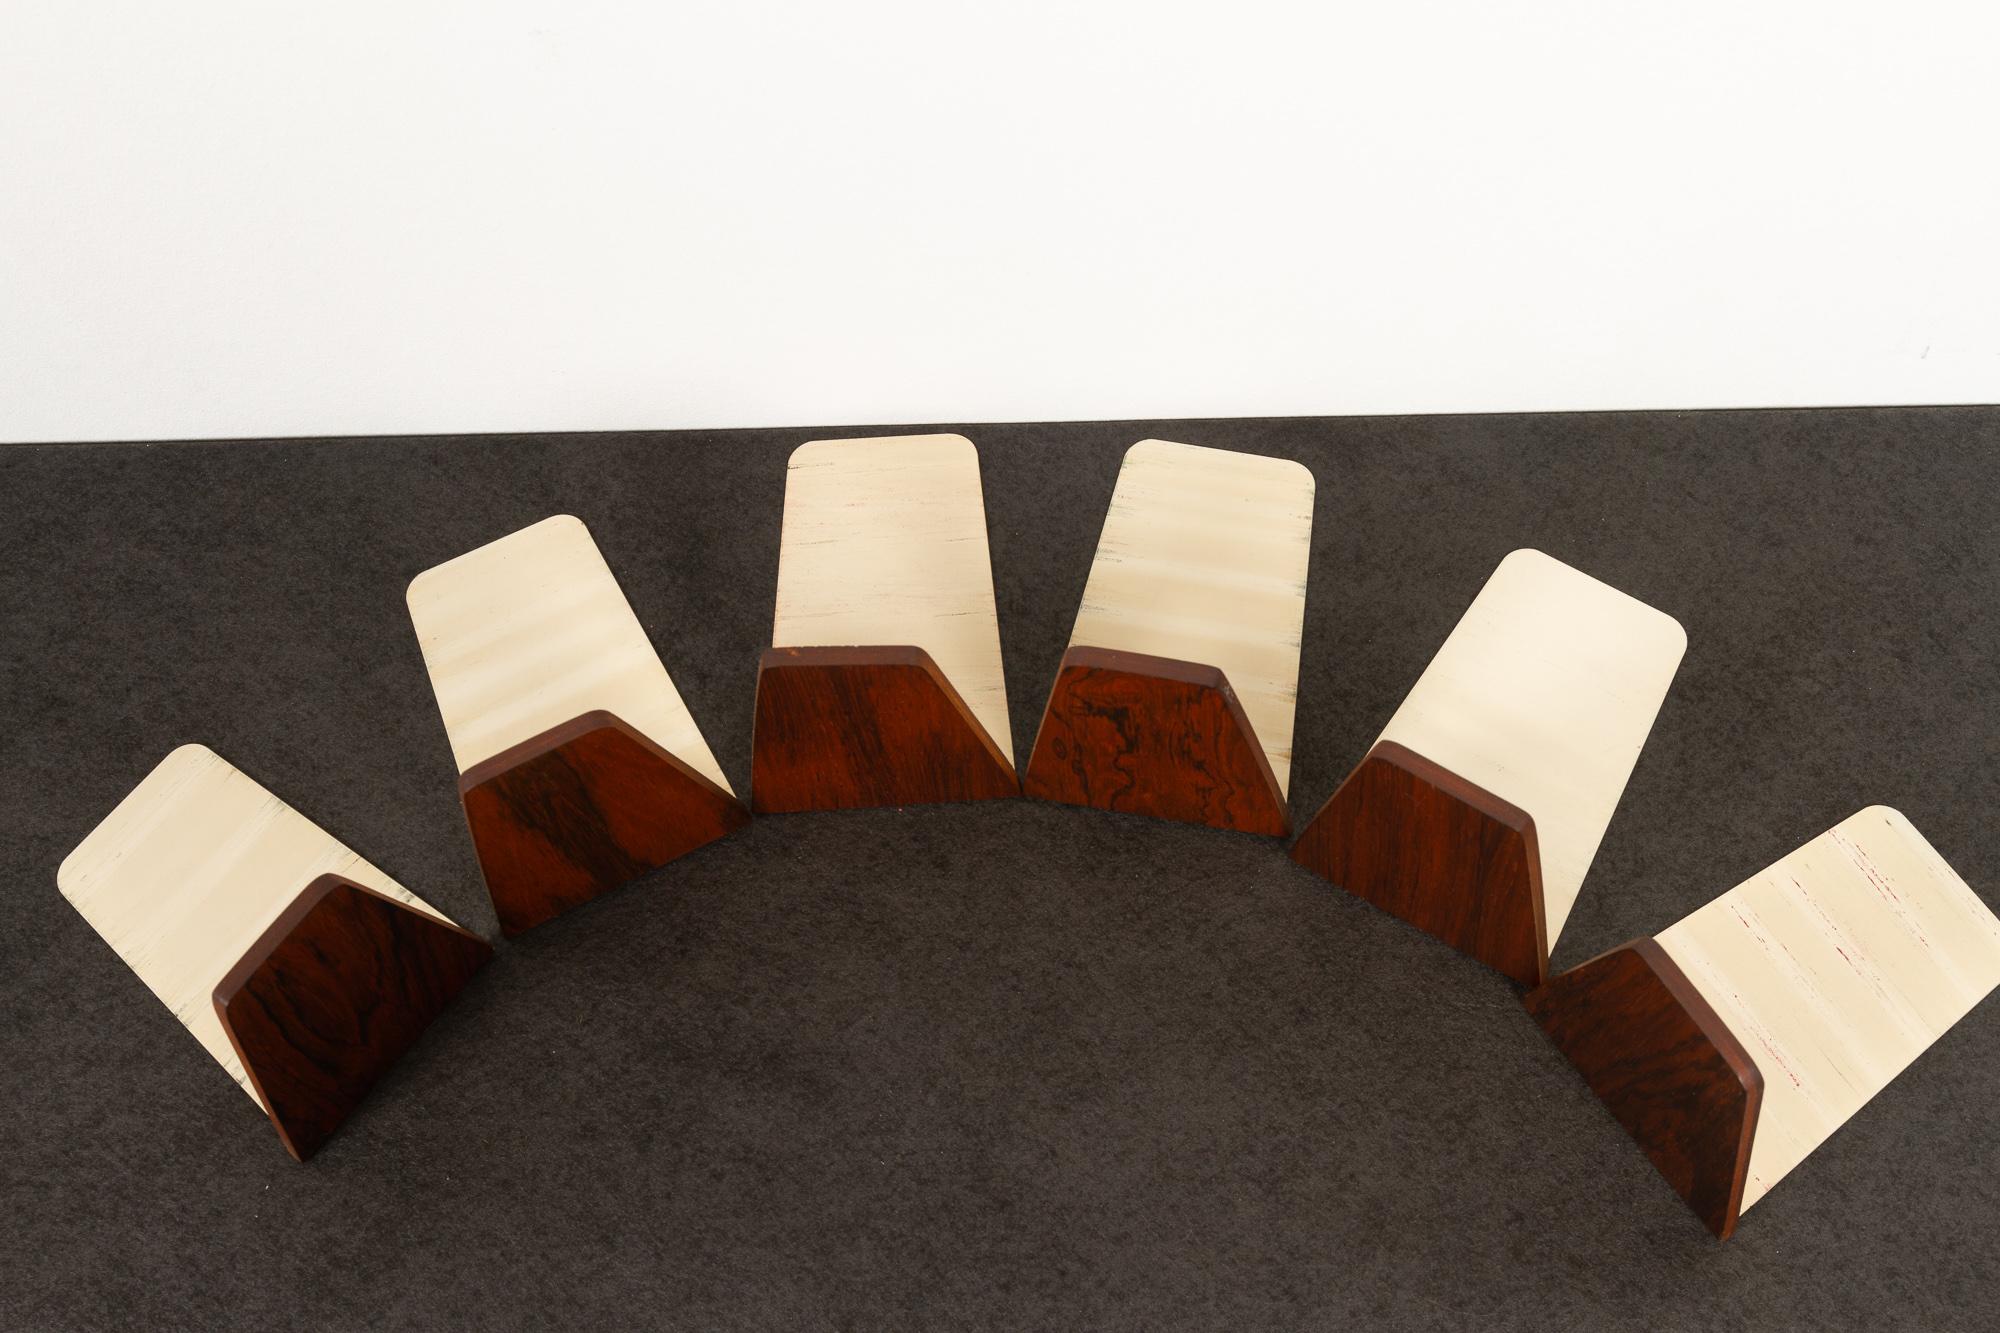 Mid-century bookends by Kai Kristiansen for FM 1960s, set of 6
Very decorative Danish modern bookends in rosewood and metal designed by Danish designer Kai Kristiansen for Feldballes Møbelfabrik.
Very good condition. Cleaned and polished.